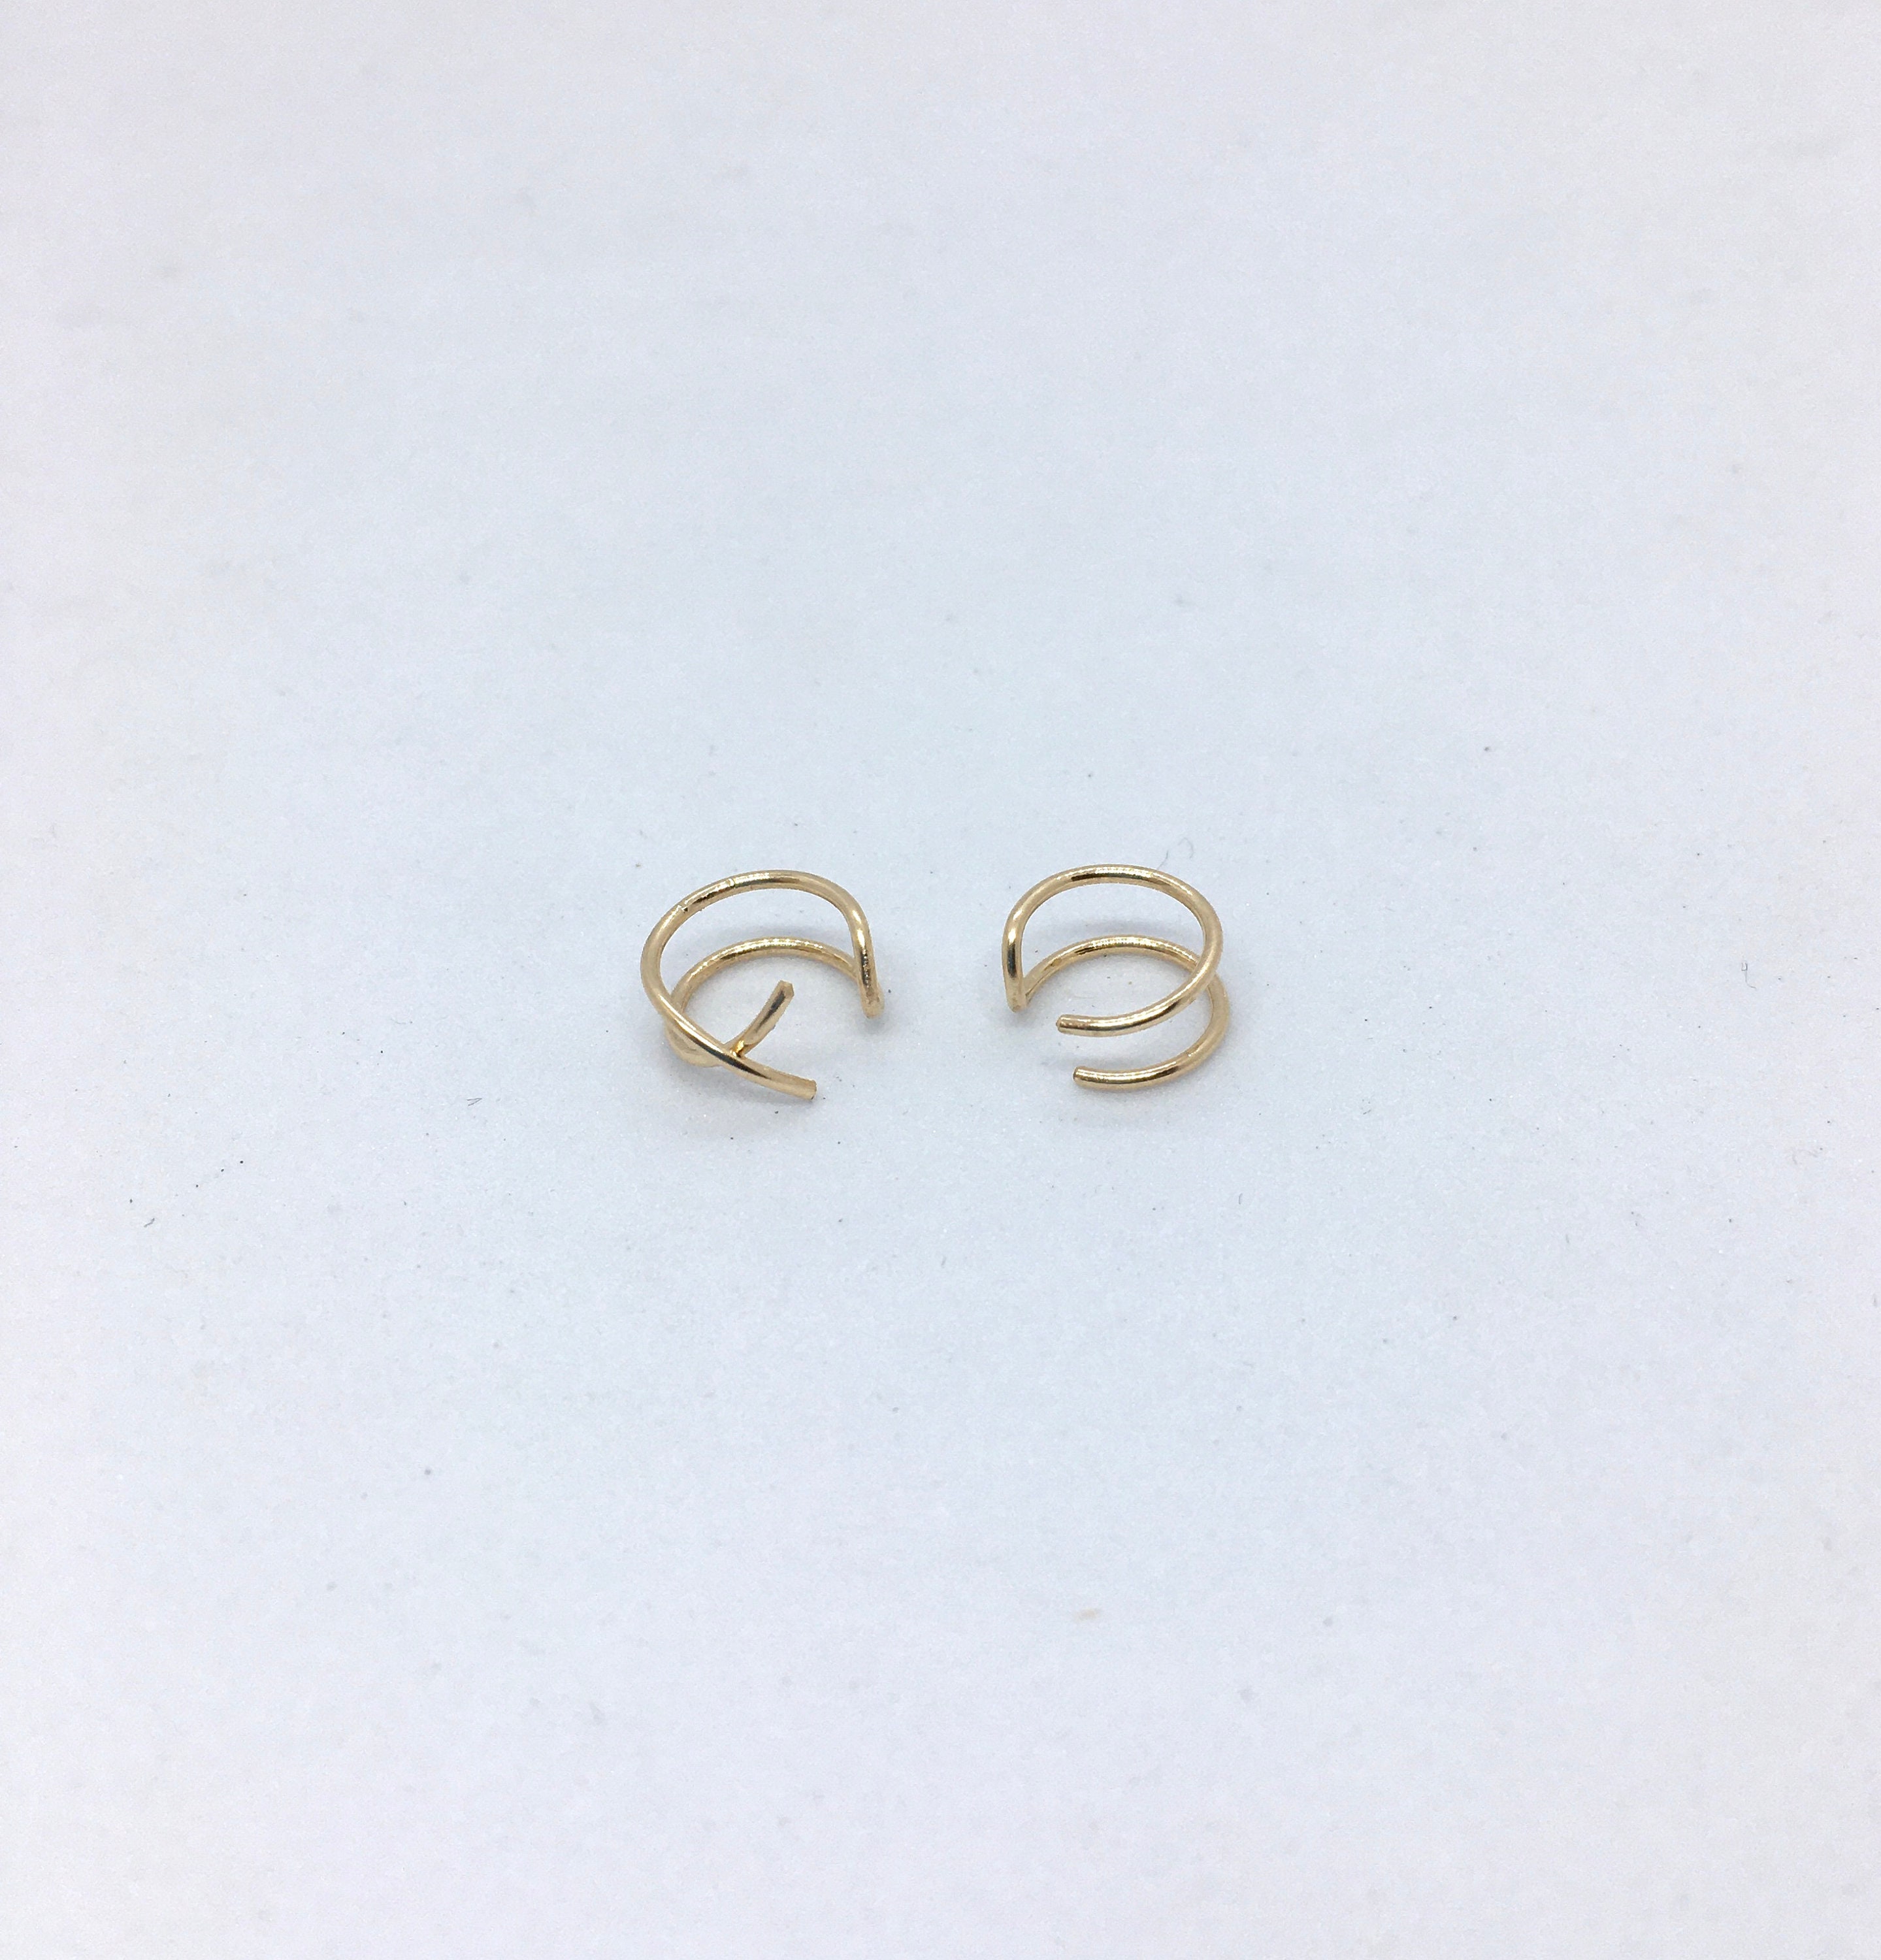 A Set of a Double Hoop and a Criss Cross Ear Cuffs in Solid | Etsy